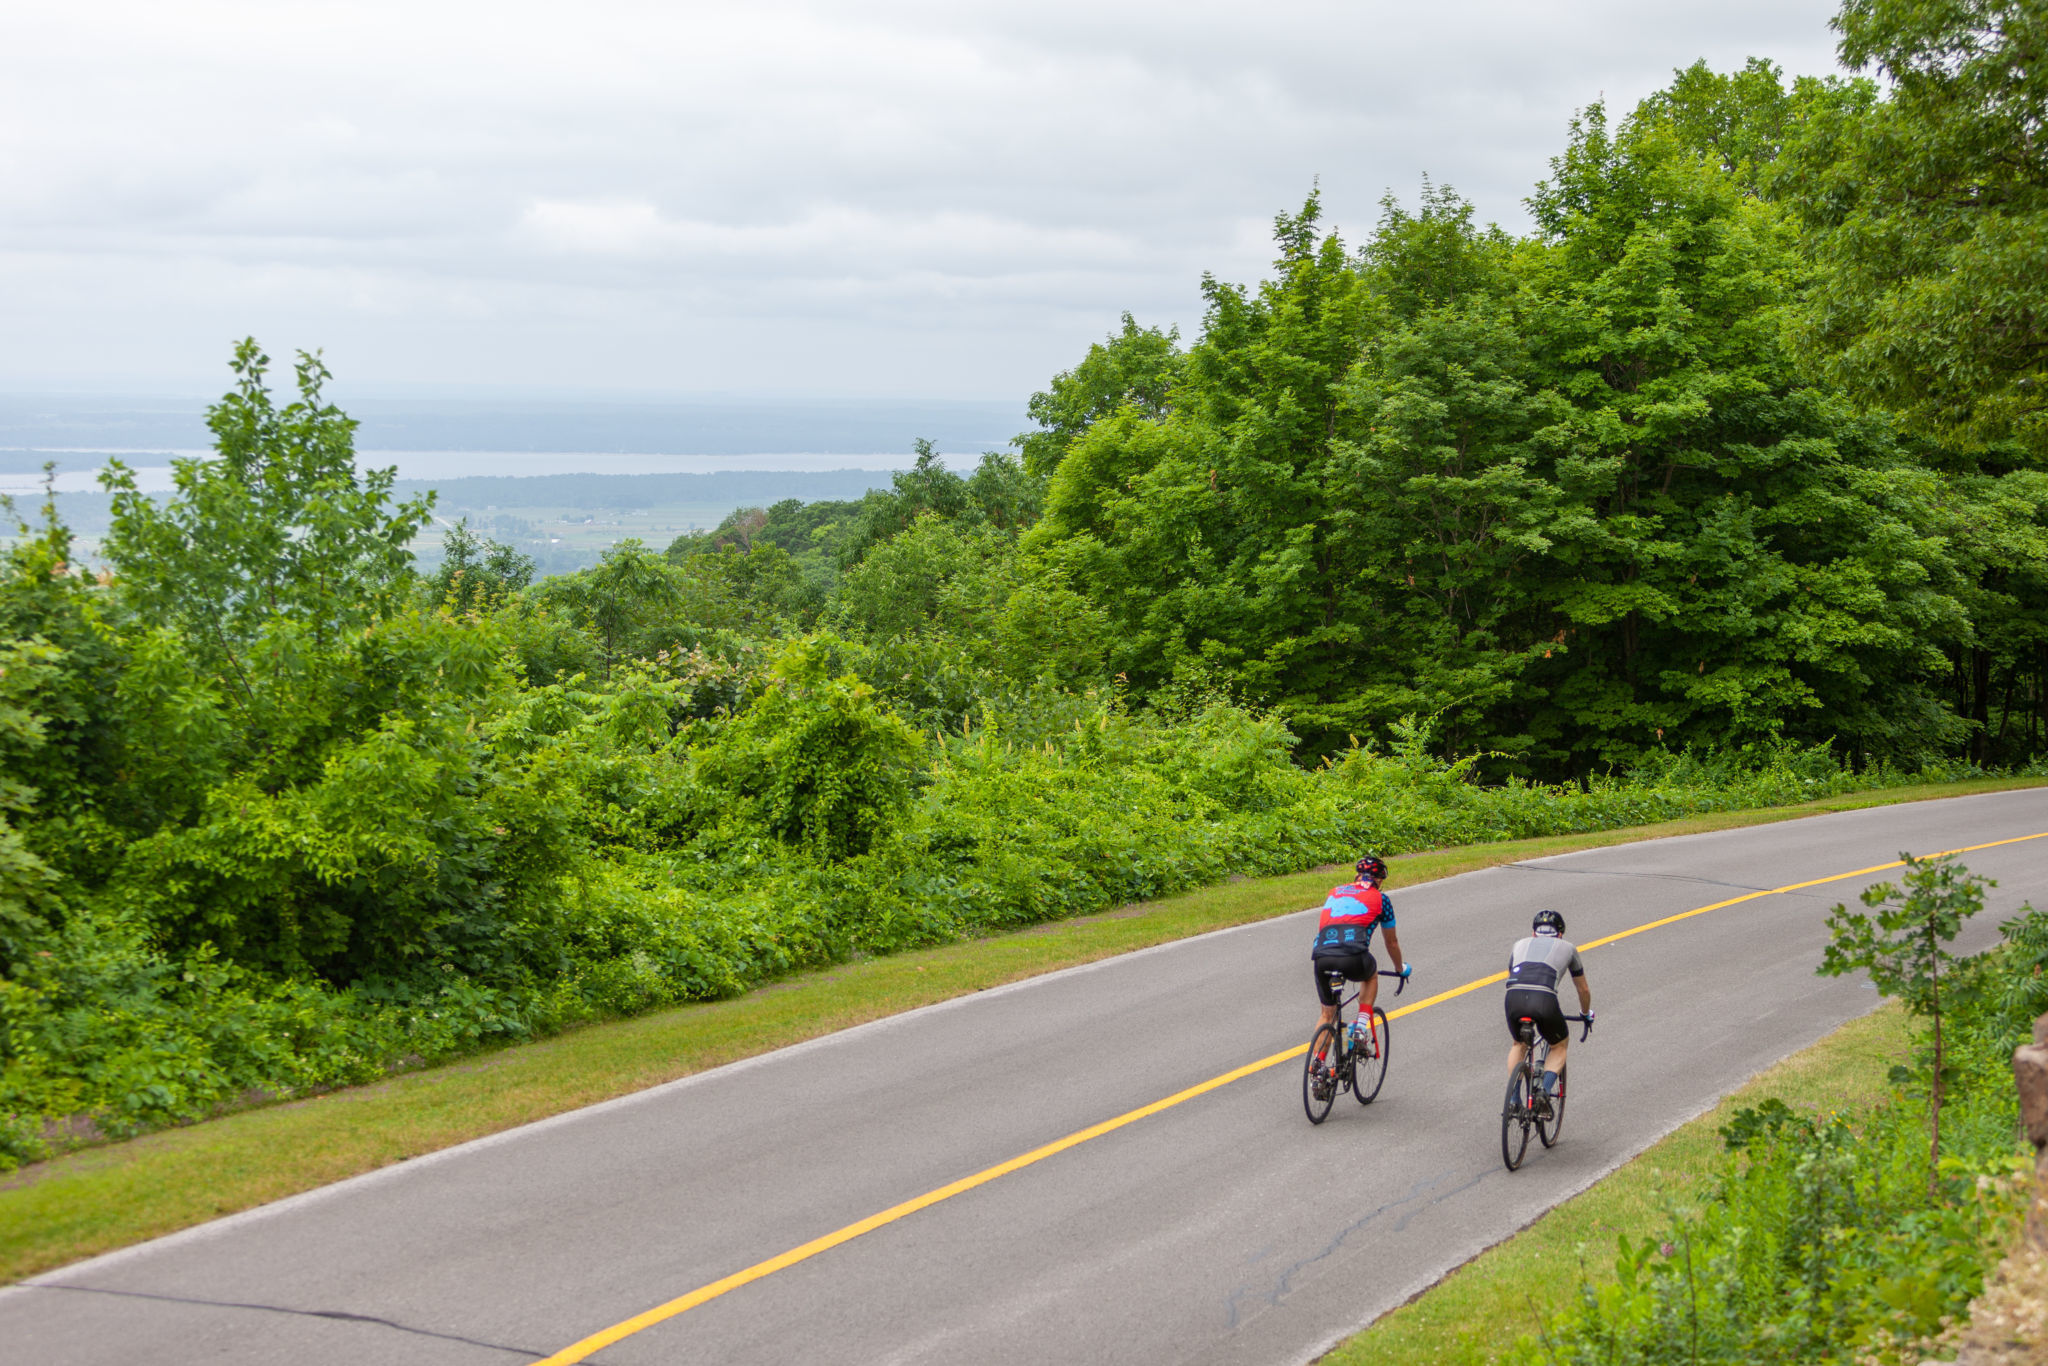 People biking on a the car-free Gatineau Park parkway in Gatineau Park.